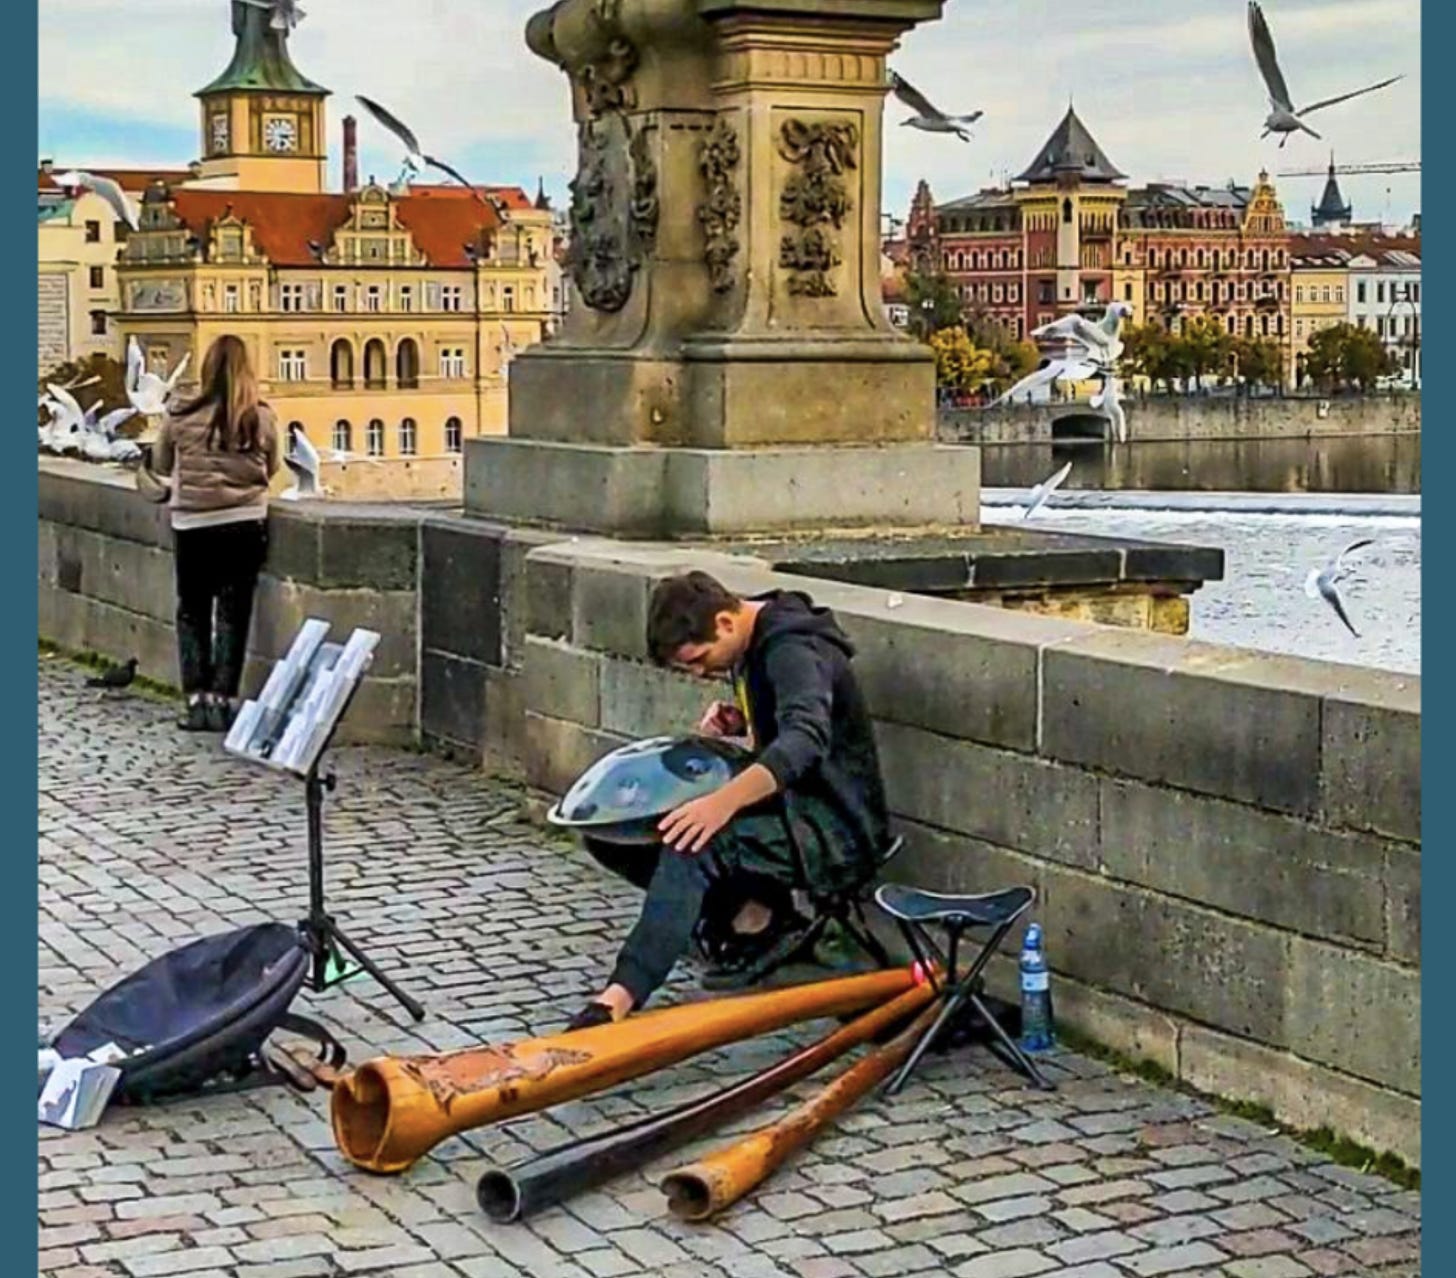 A young man plays a metal drum and enormous wooden horns on the Charles Bridge as seagulls circle overhead.